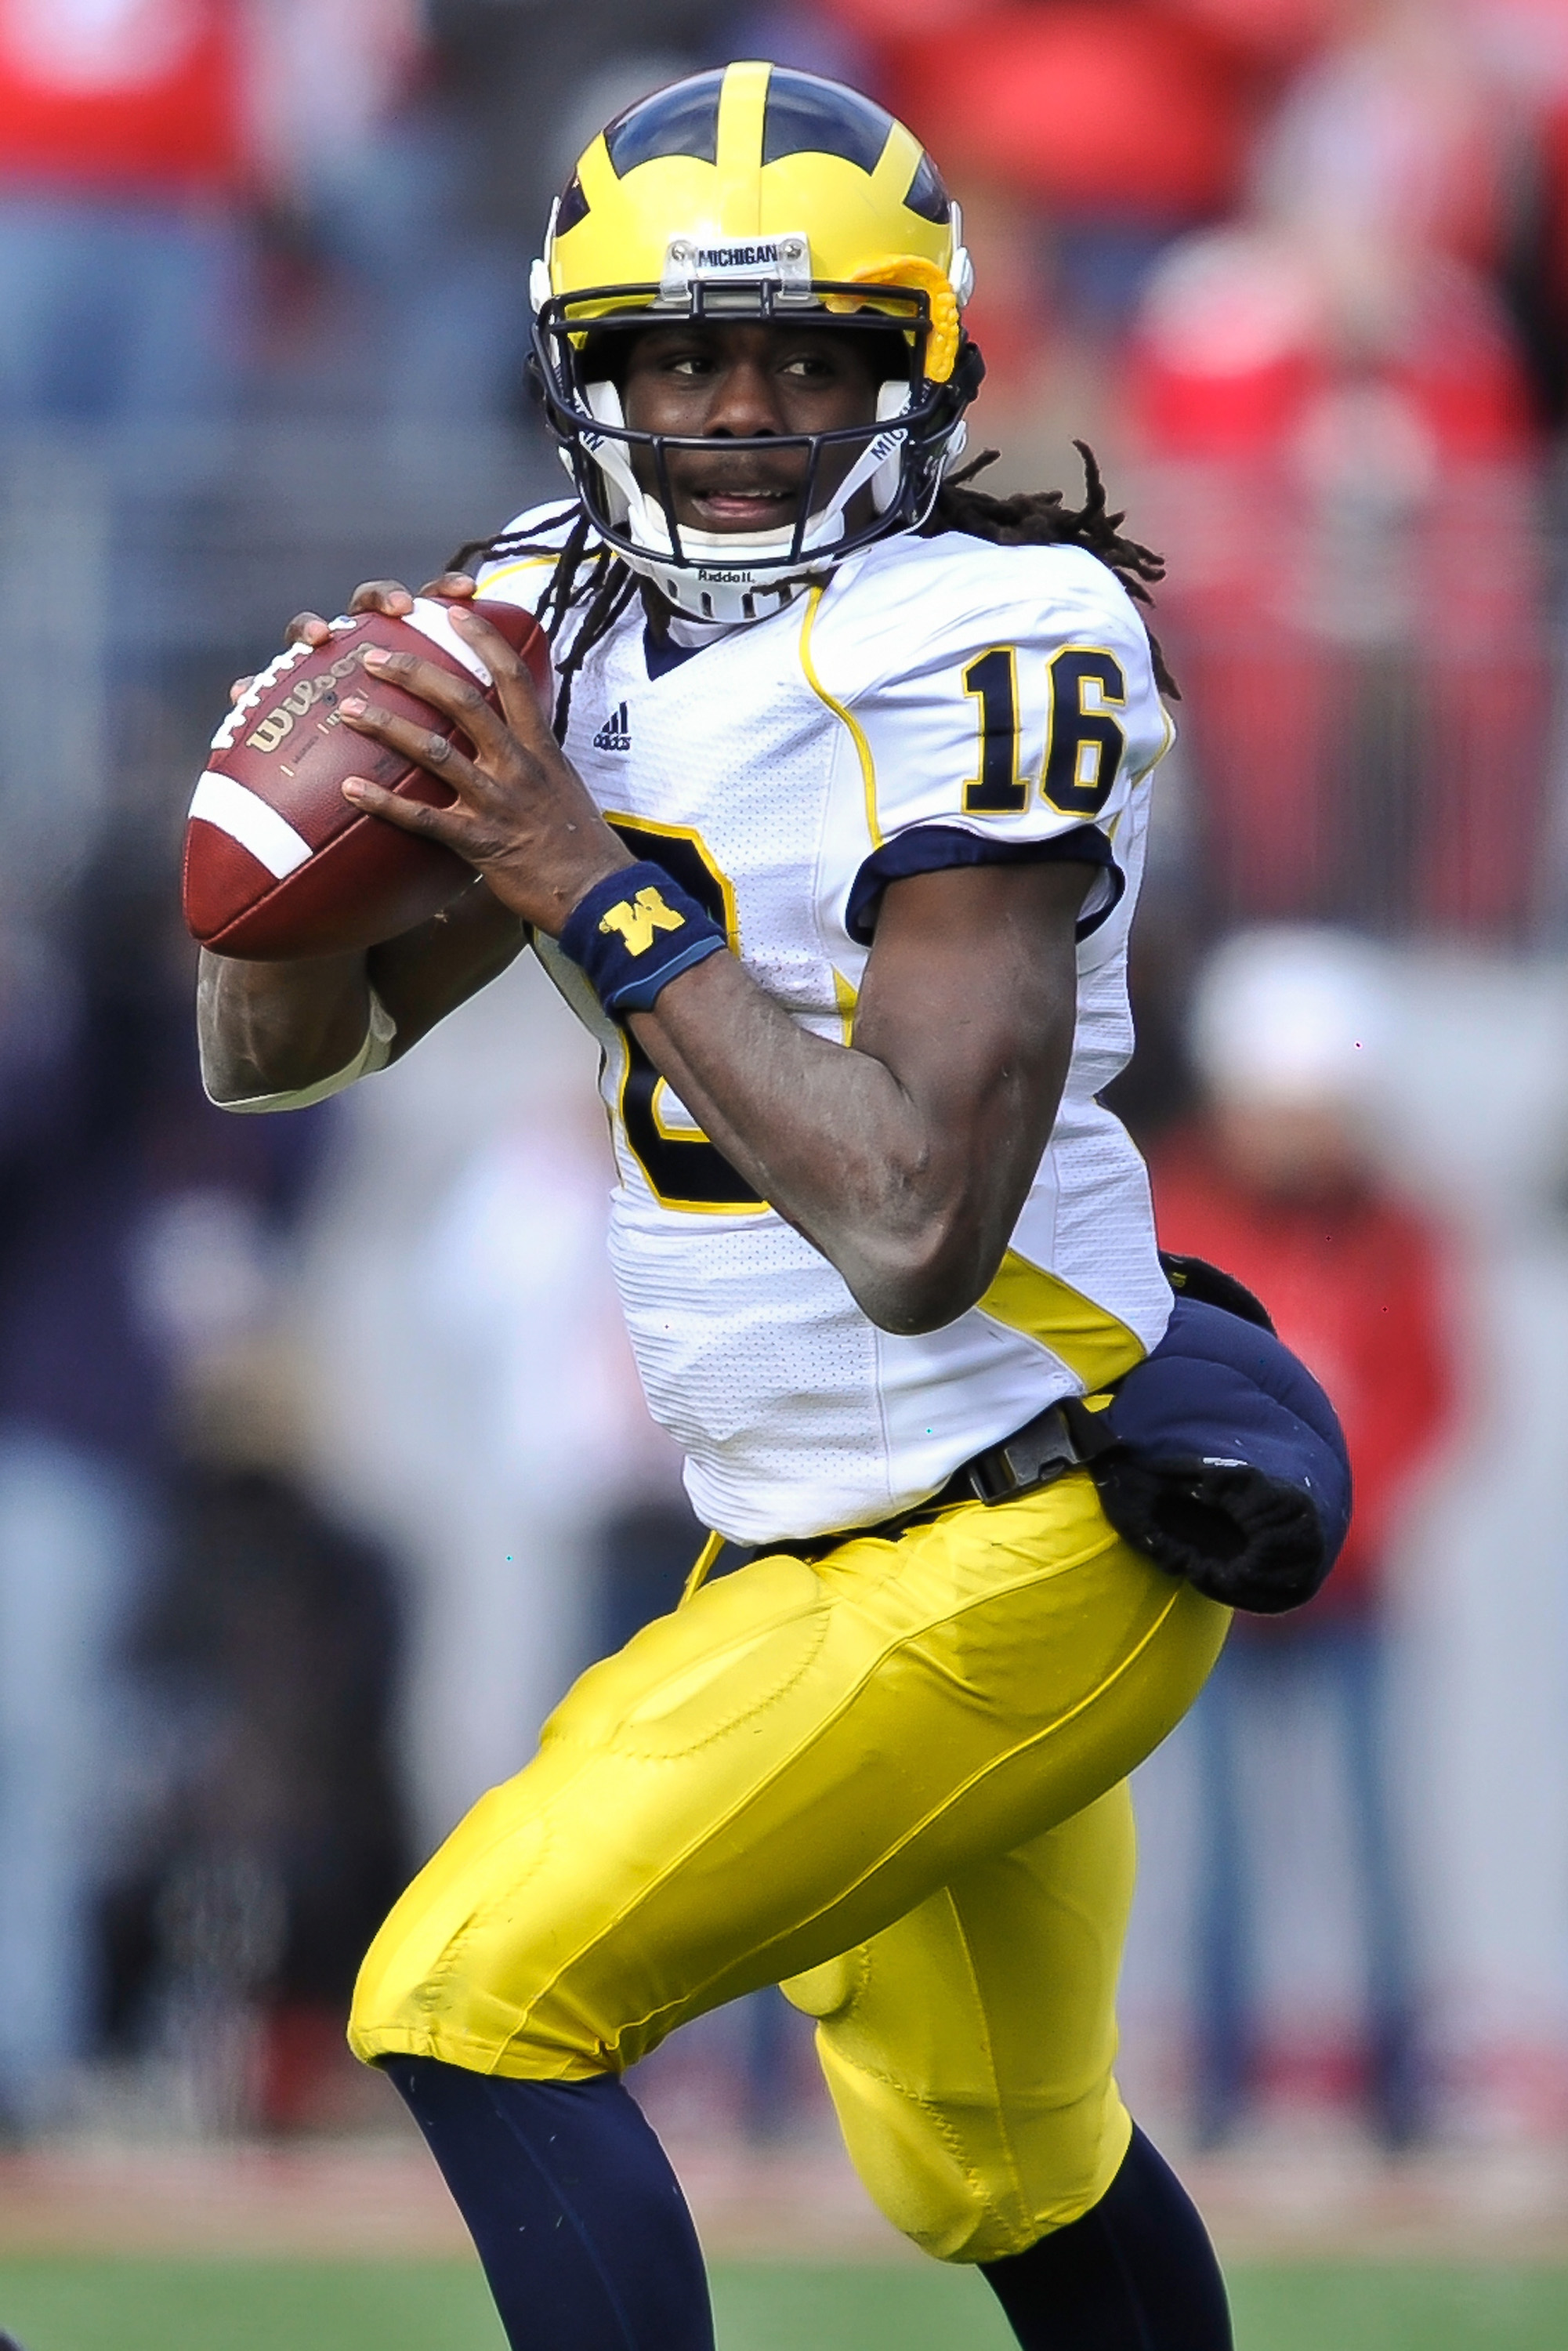 COLUMBUS, OH - NOVEMBER 27:  Quarterback Denard Robinson #16 of the Michigan Wolverines drops back to pass against the Ohio State Buckeyes at Ohio Stadium on November 27, 2010 in Columbus, Ohio.  (Photo by Jamie Sabau/Getty Images)